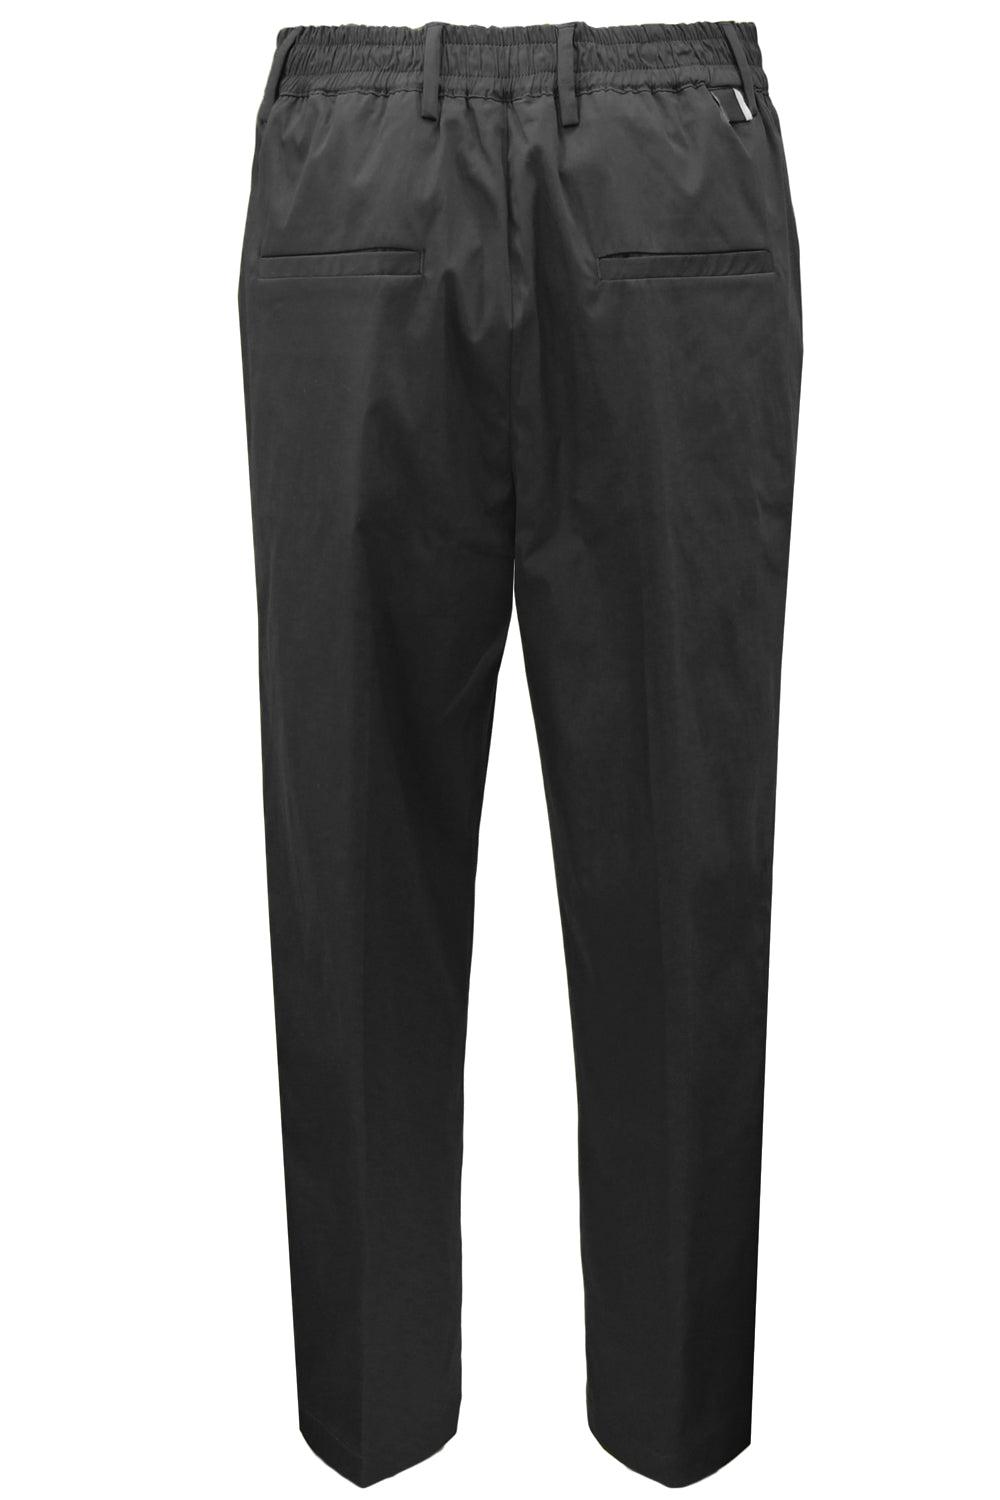 LOW BRAND Pantalone in cotone George